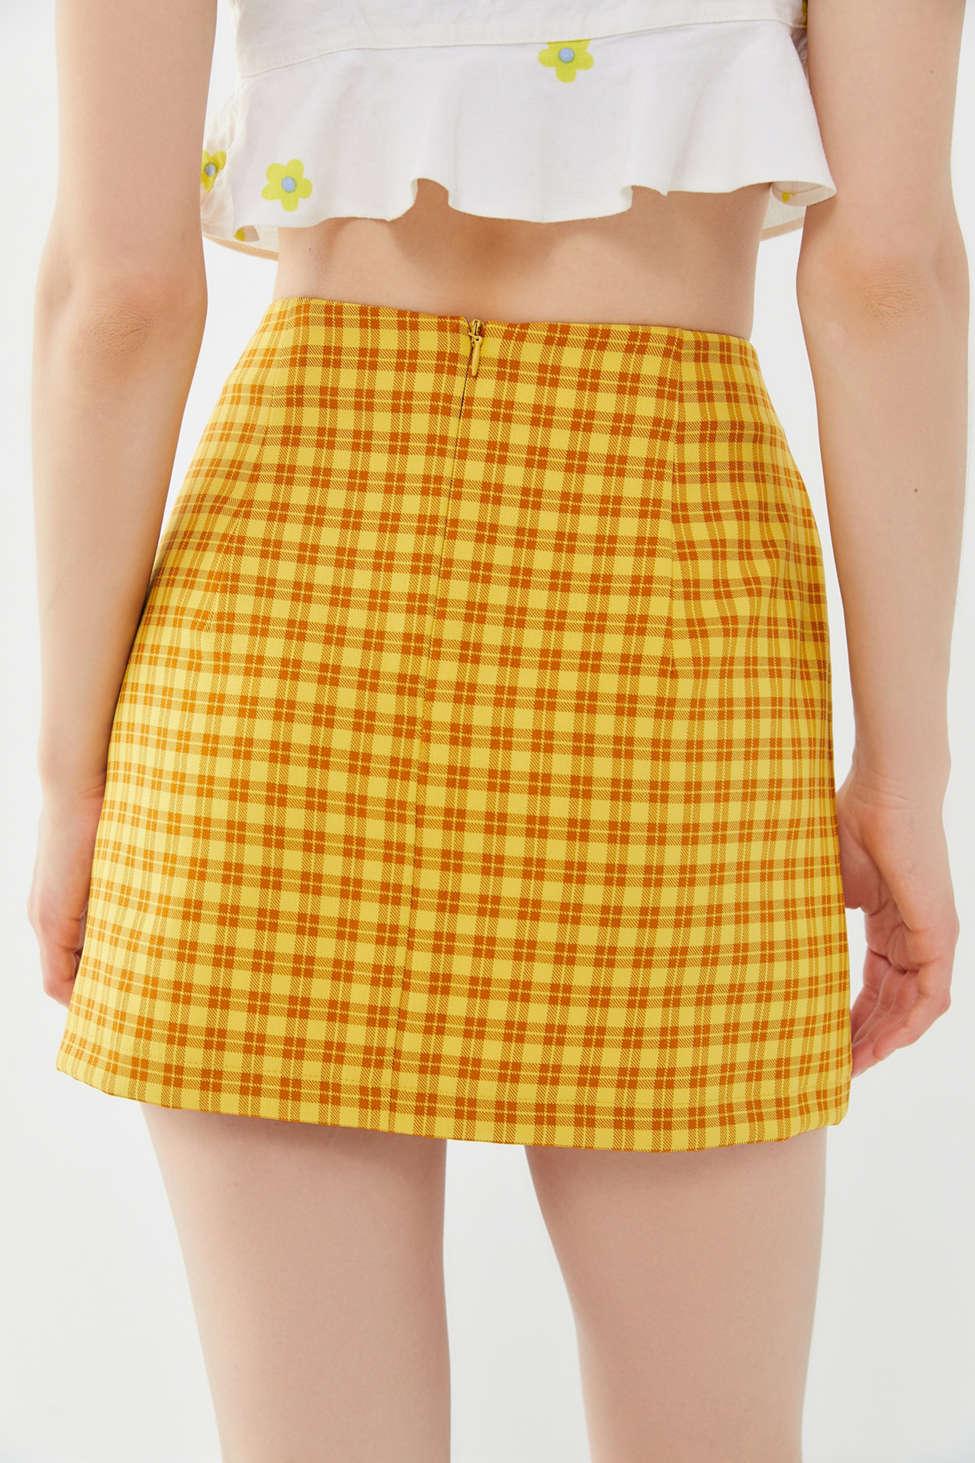 Urban Outfitters Uo Gretchen Plaid Pelmet Mini Skirt in Yellow - Lyst